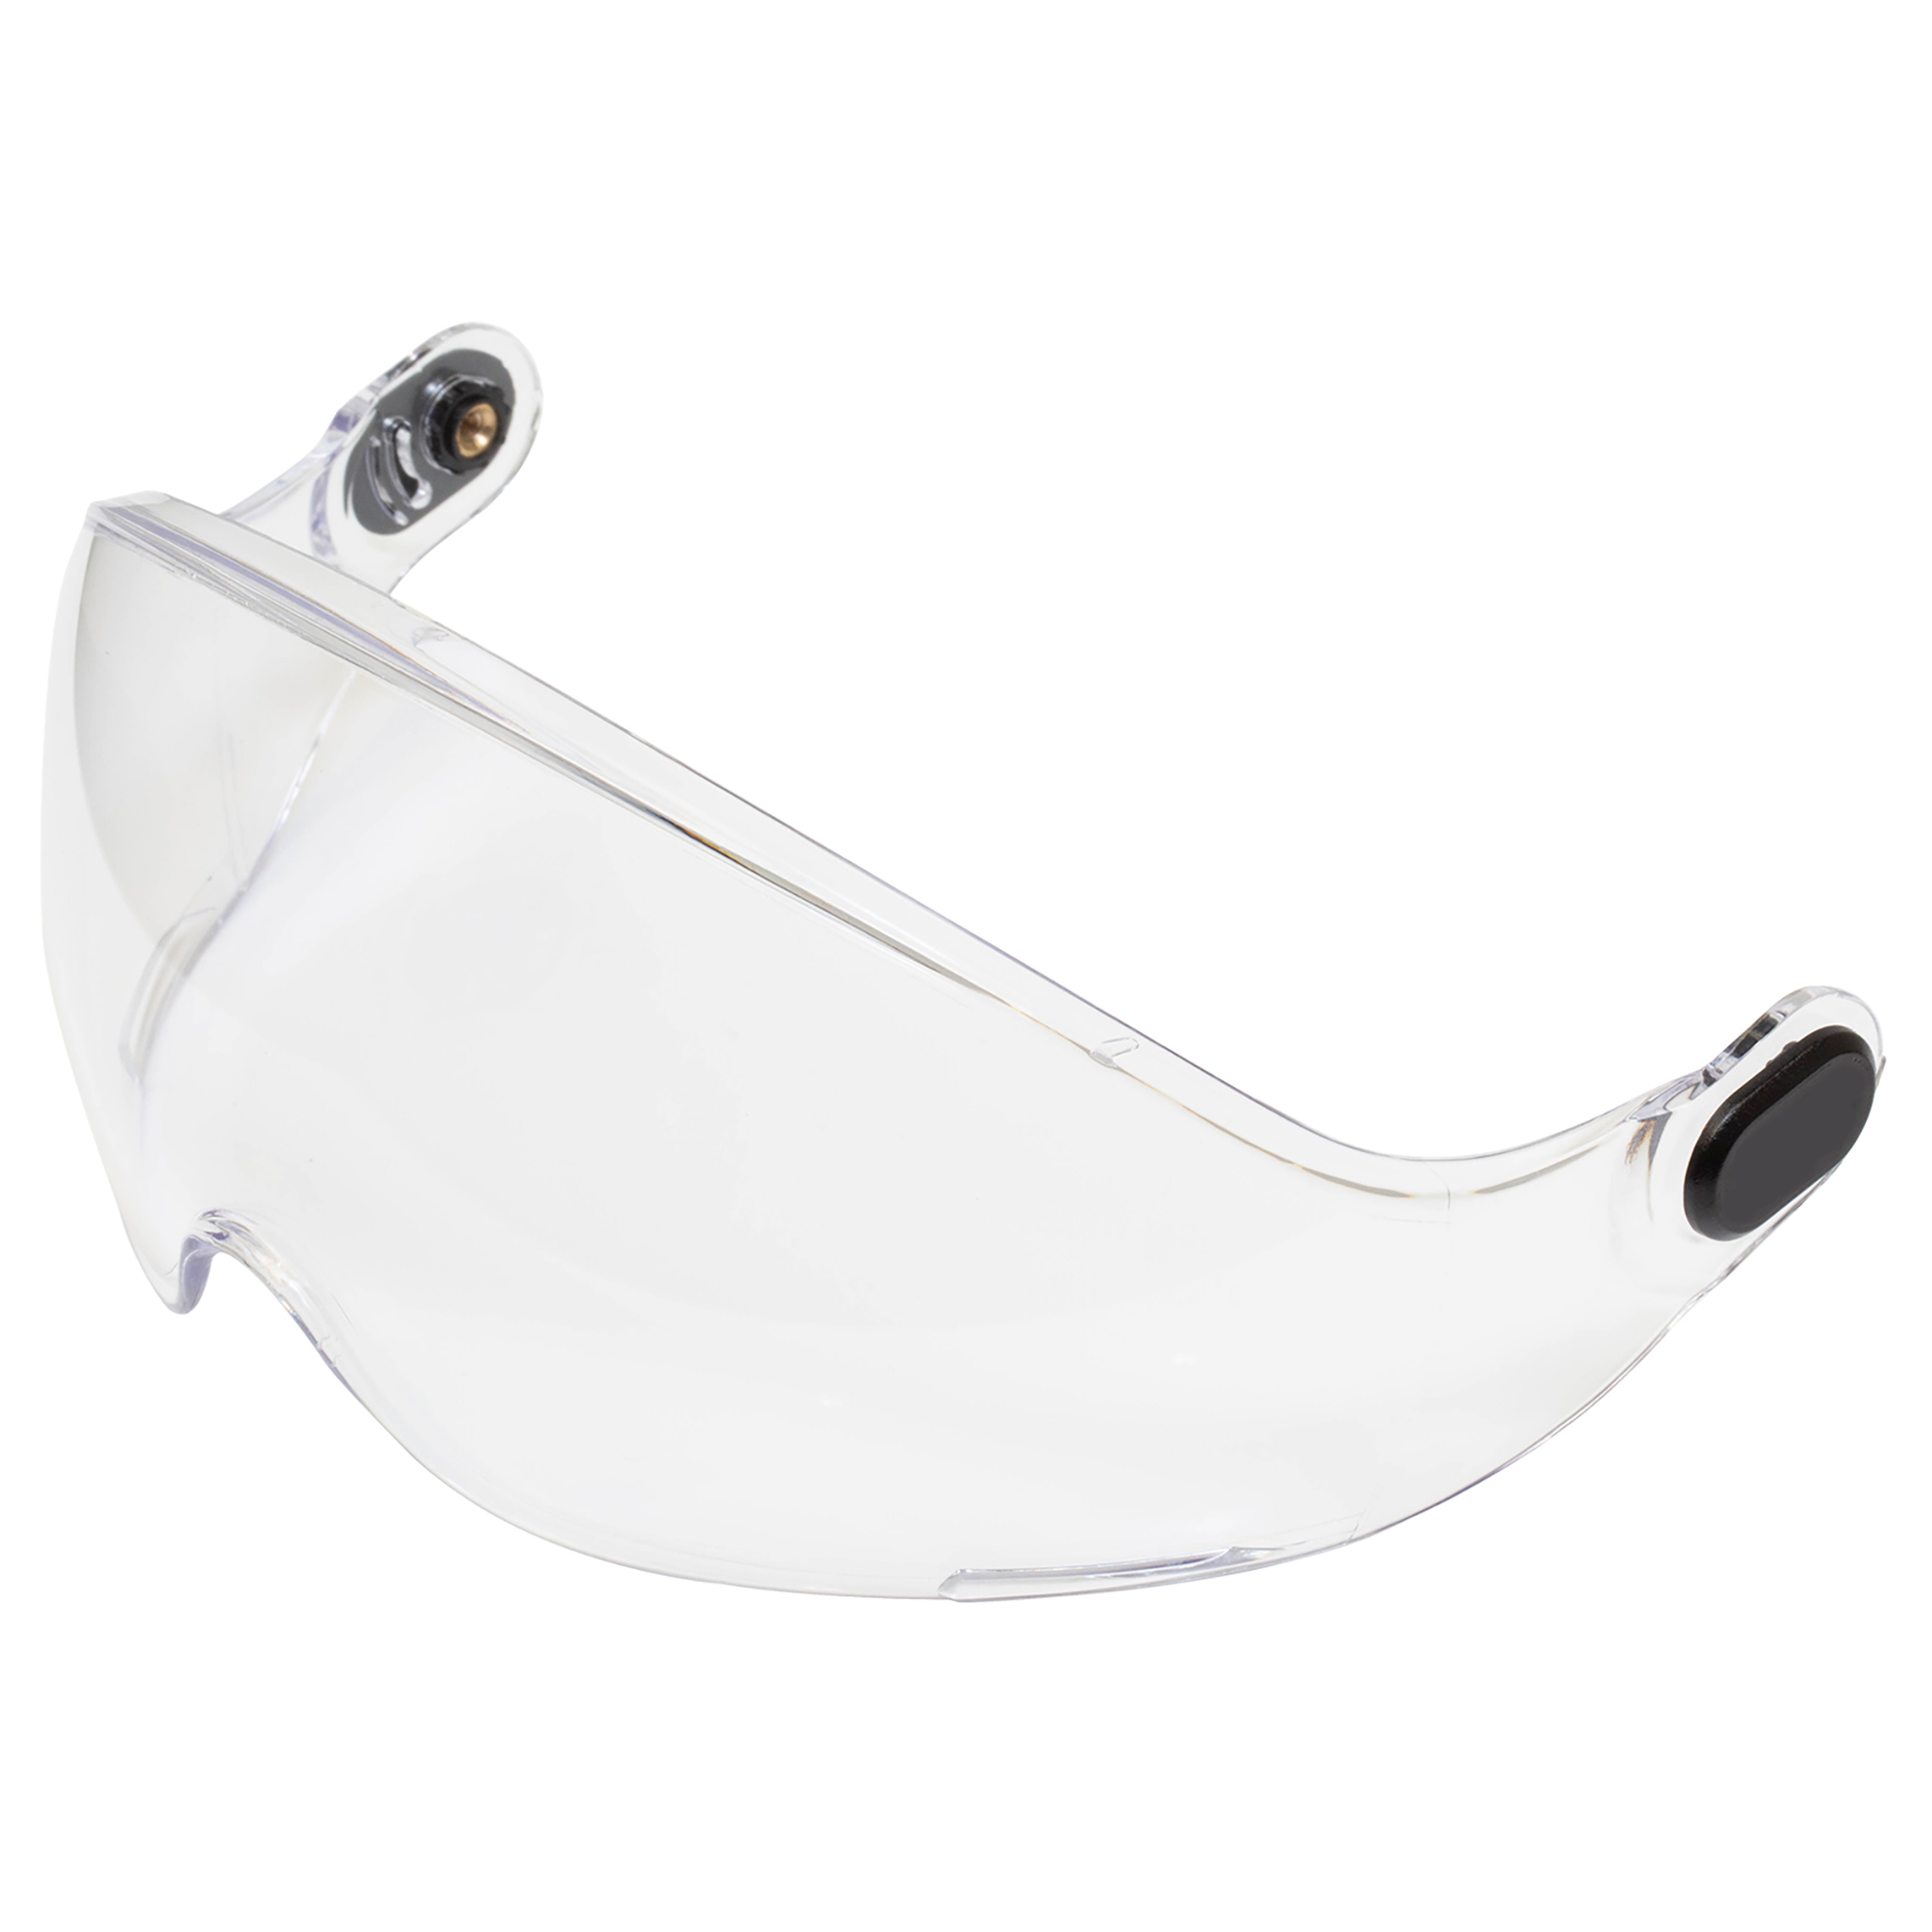 Mountable & Retractable Visor for Hard Hats with UV Protection – JORESTECH